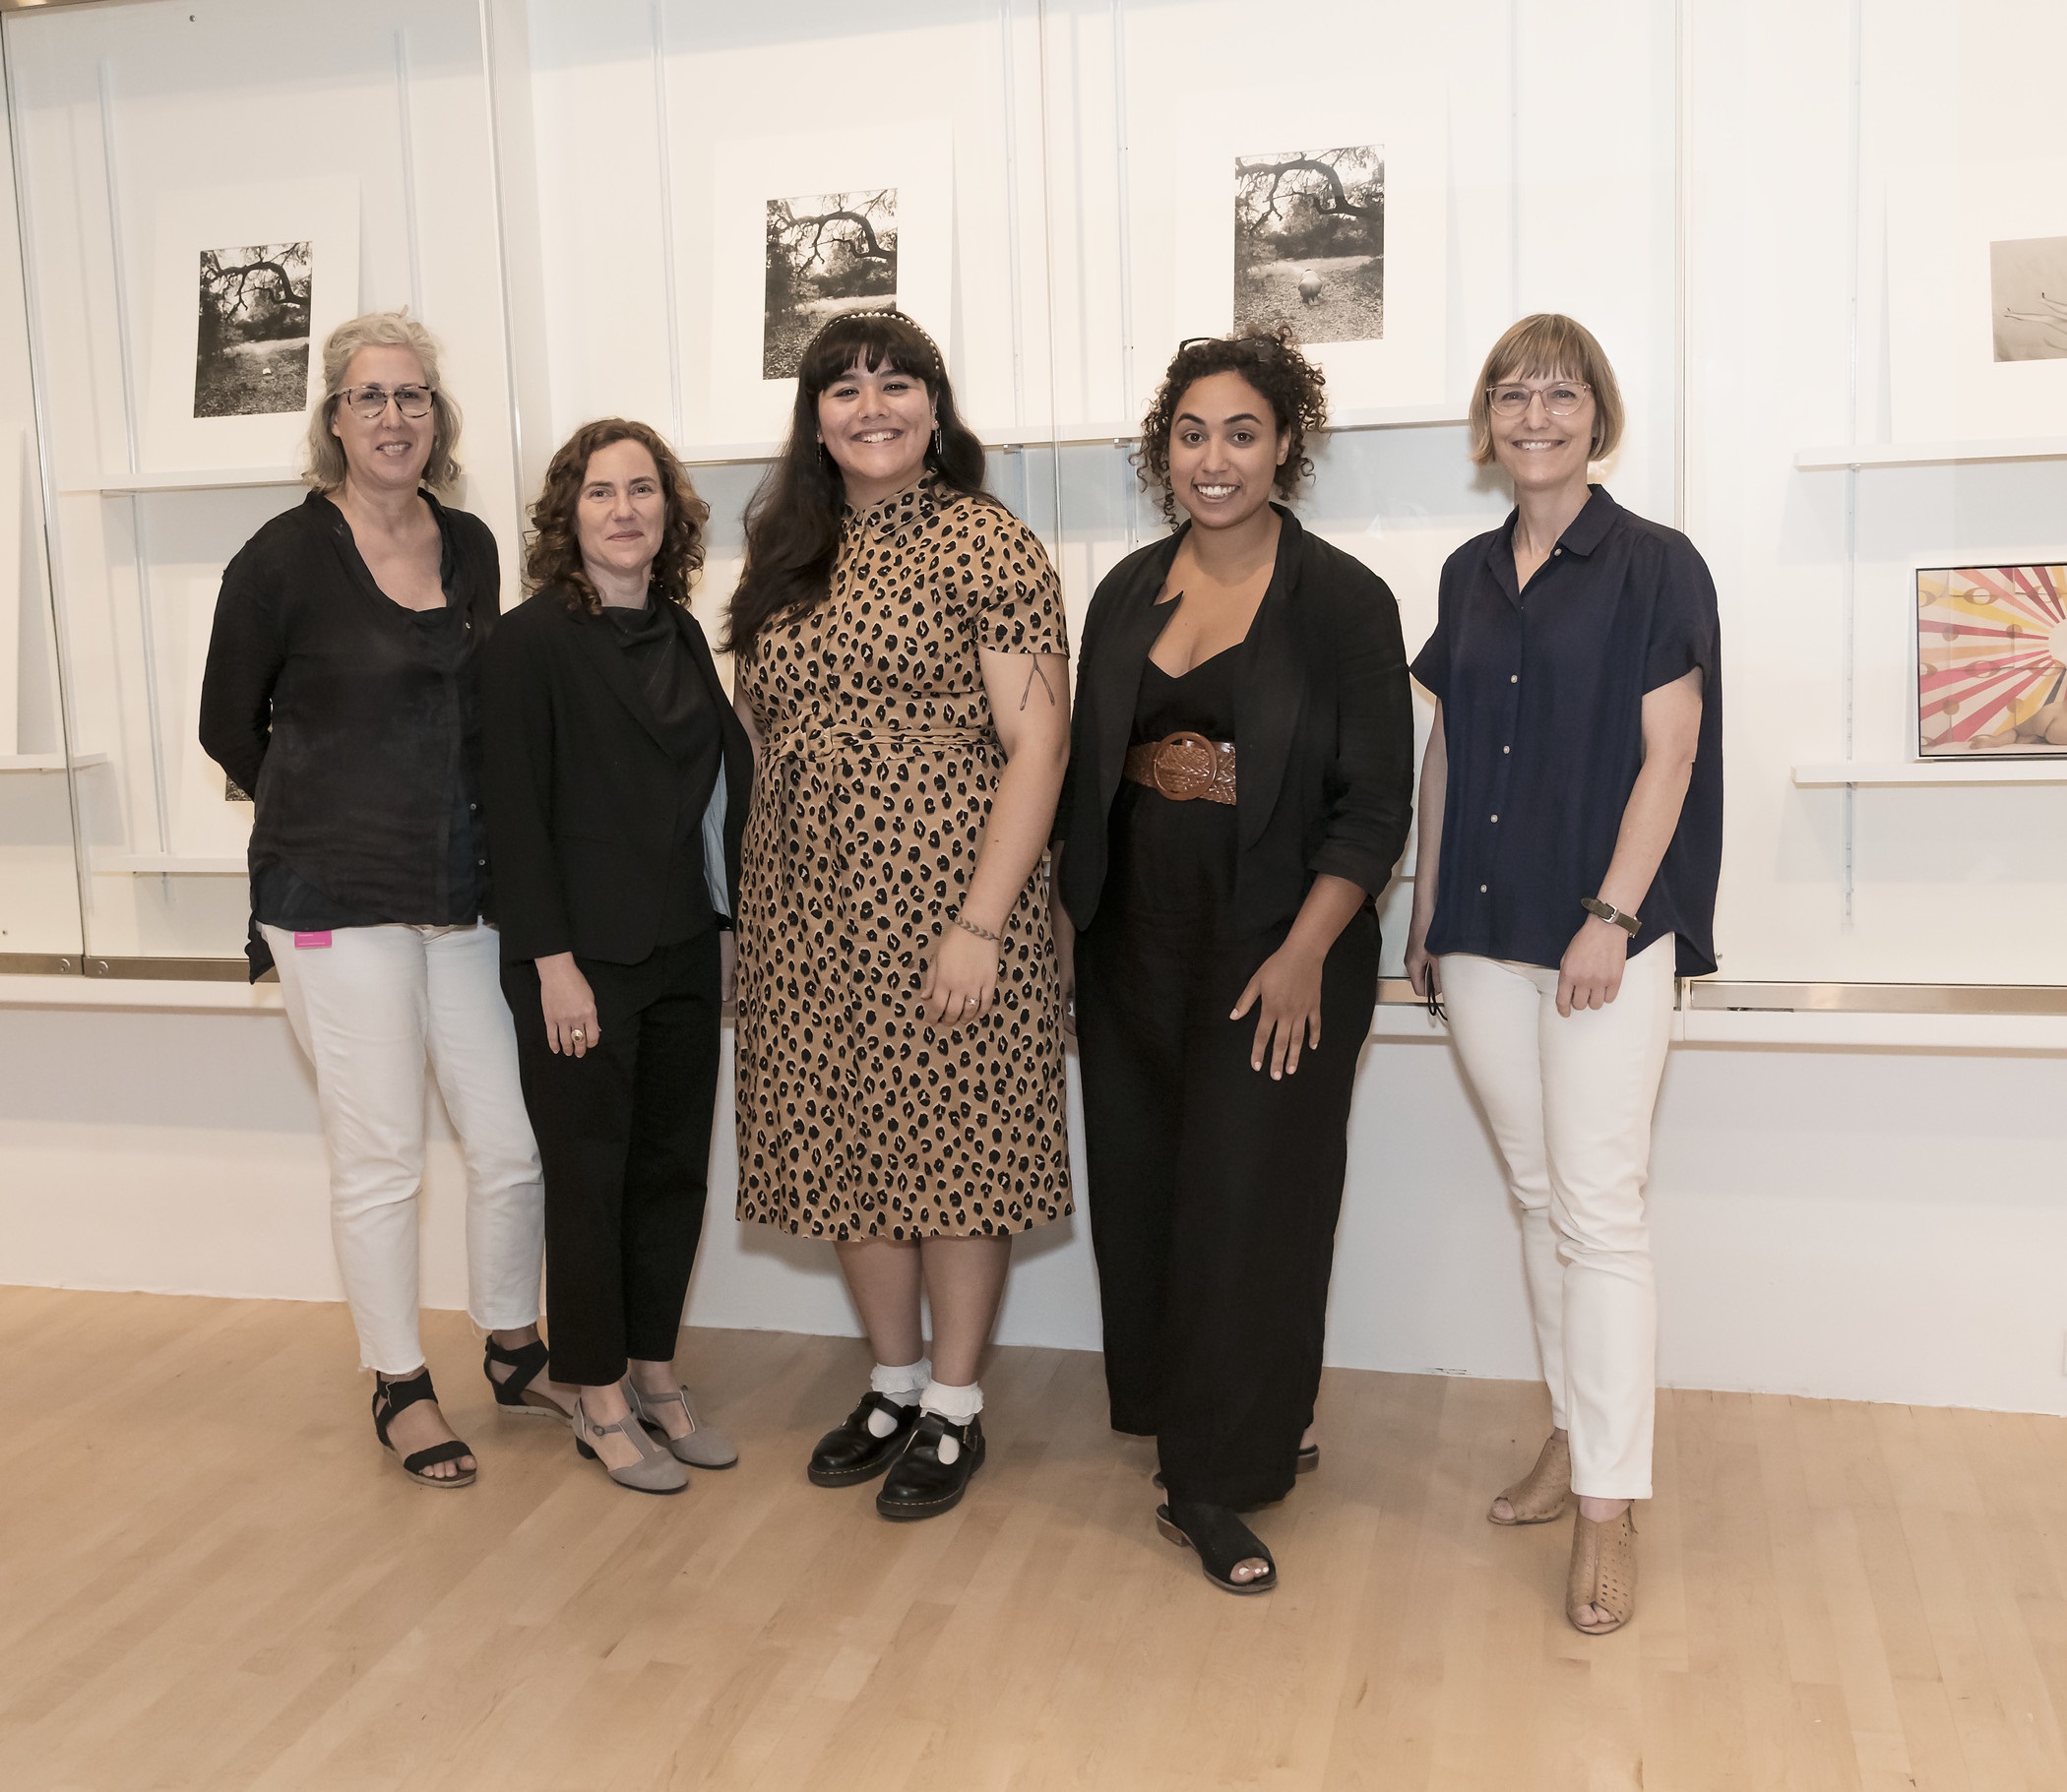 From left: Eve Schillo, Assistant Curator, Photography; Rebecca Morse, Curator, Photography; Danielle Pesqueira, 2018–20 Mellon Undergraduate Curatorial Fellow; Dhyandra Lawson, Curatorial Assistant, Photography; and Britt Salvesen, Department Head and Curator of Photography and Prints & Drawings